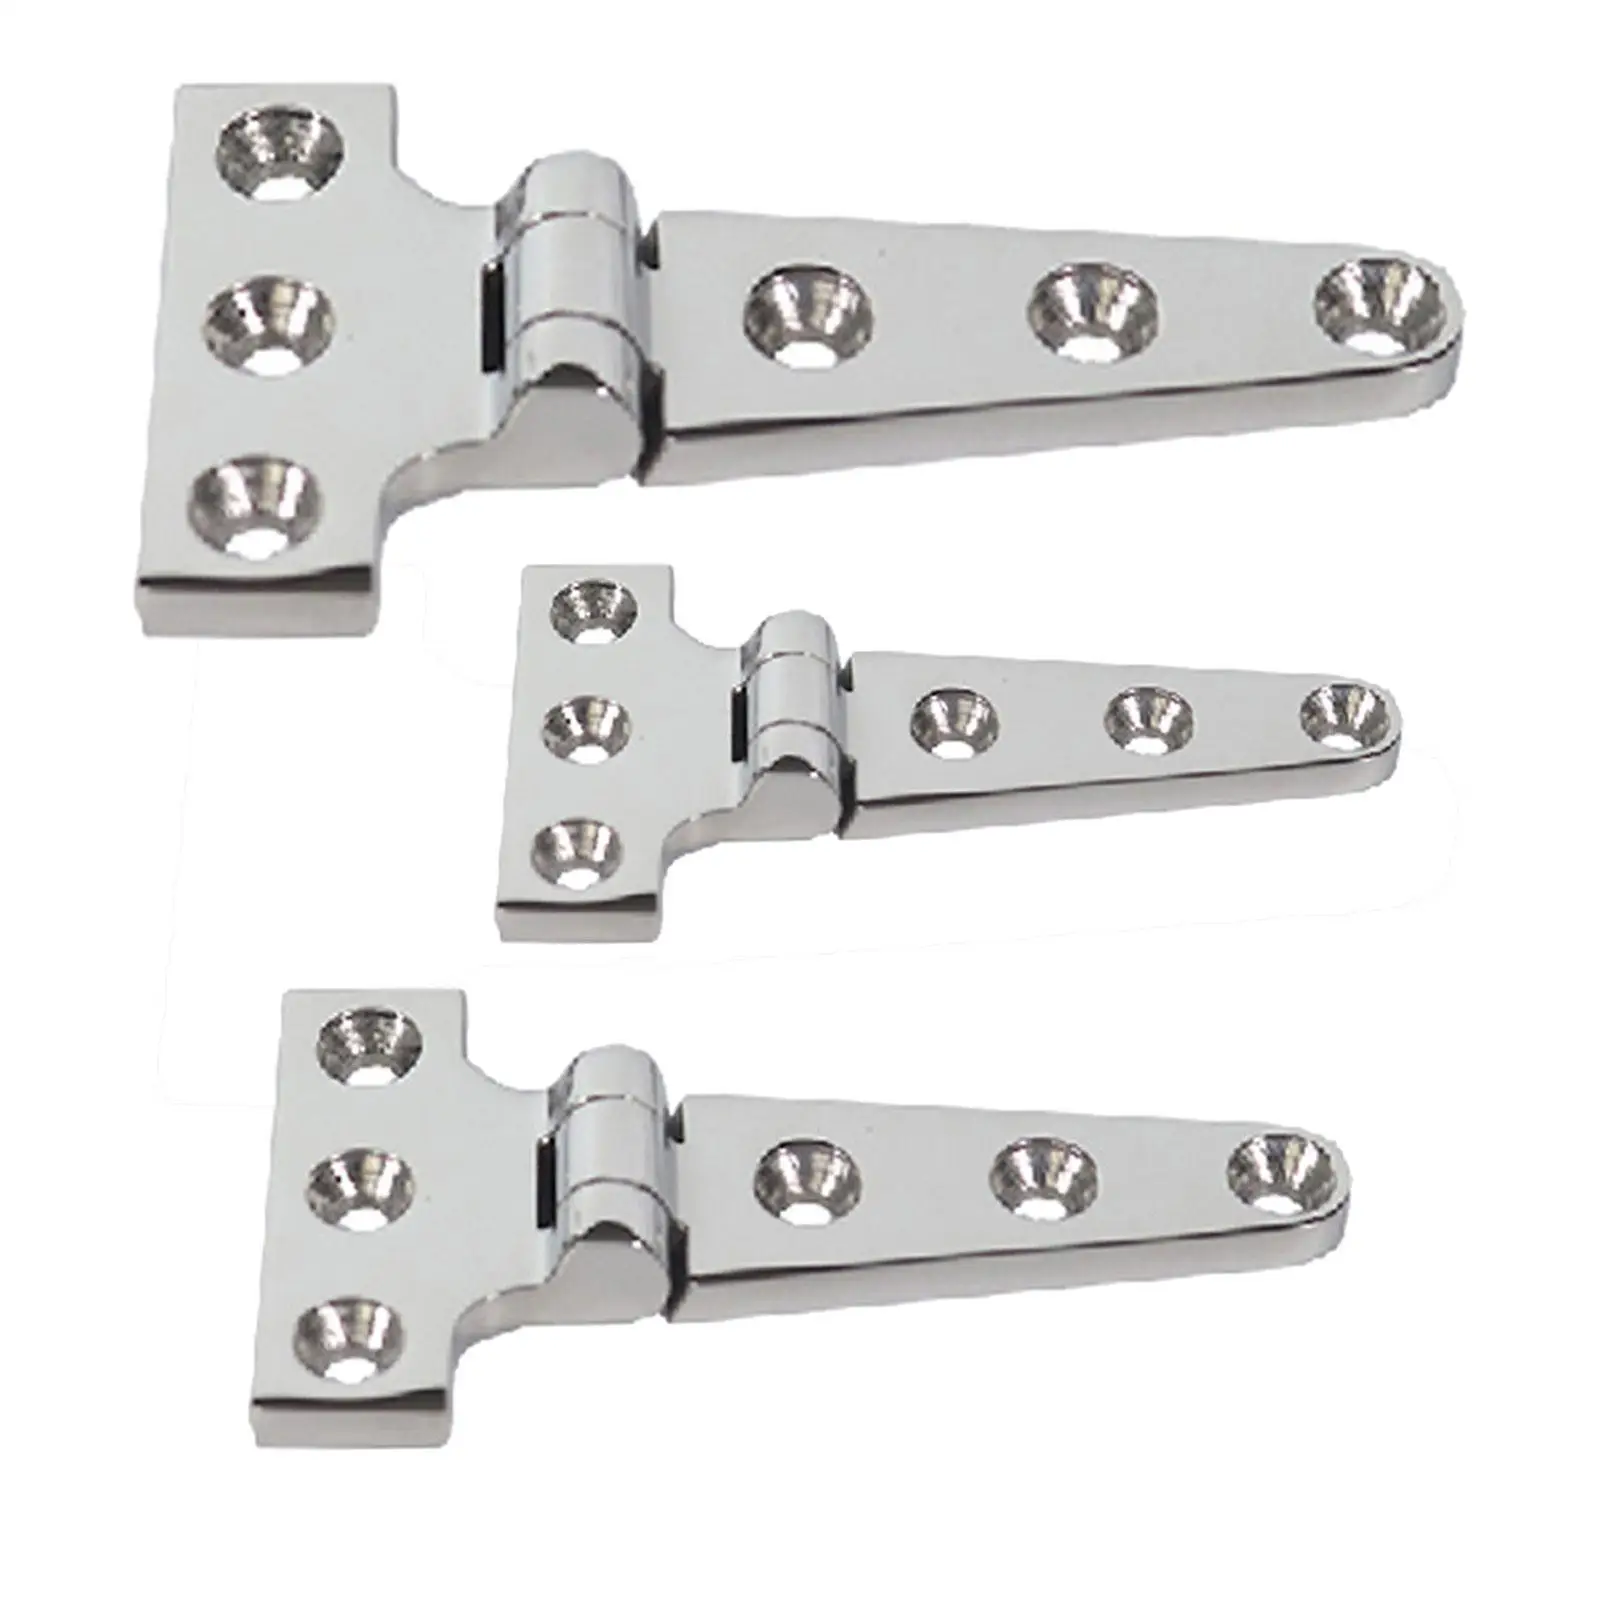 T Shaped Hinges 316 Stainless Steel Boat Hinge Durable for Decks, Gates, Toolboxes Easily Install Accessories Heavy Duty